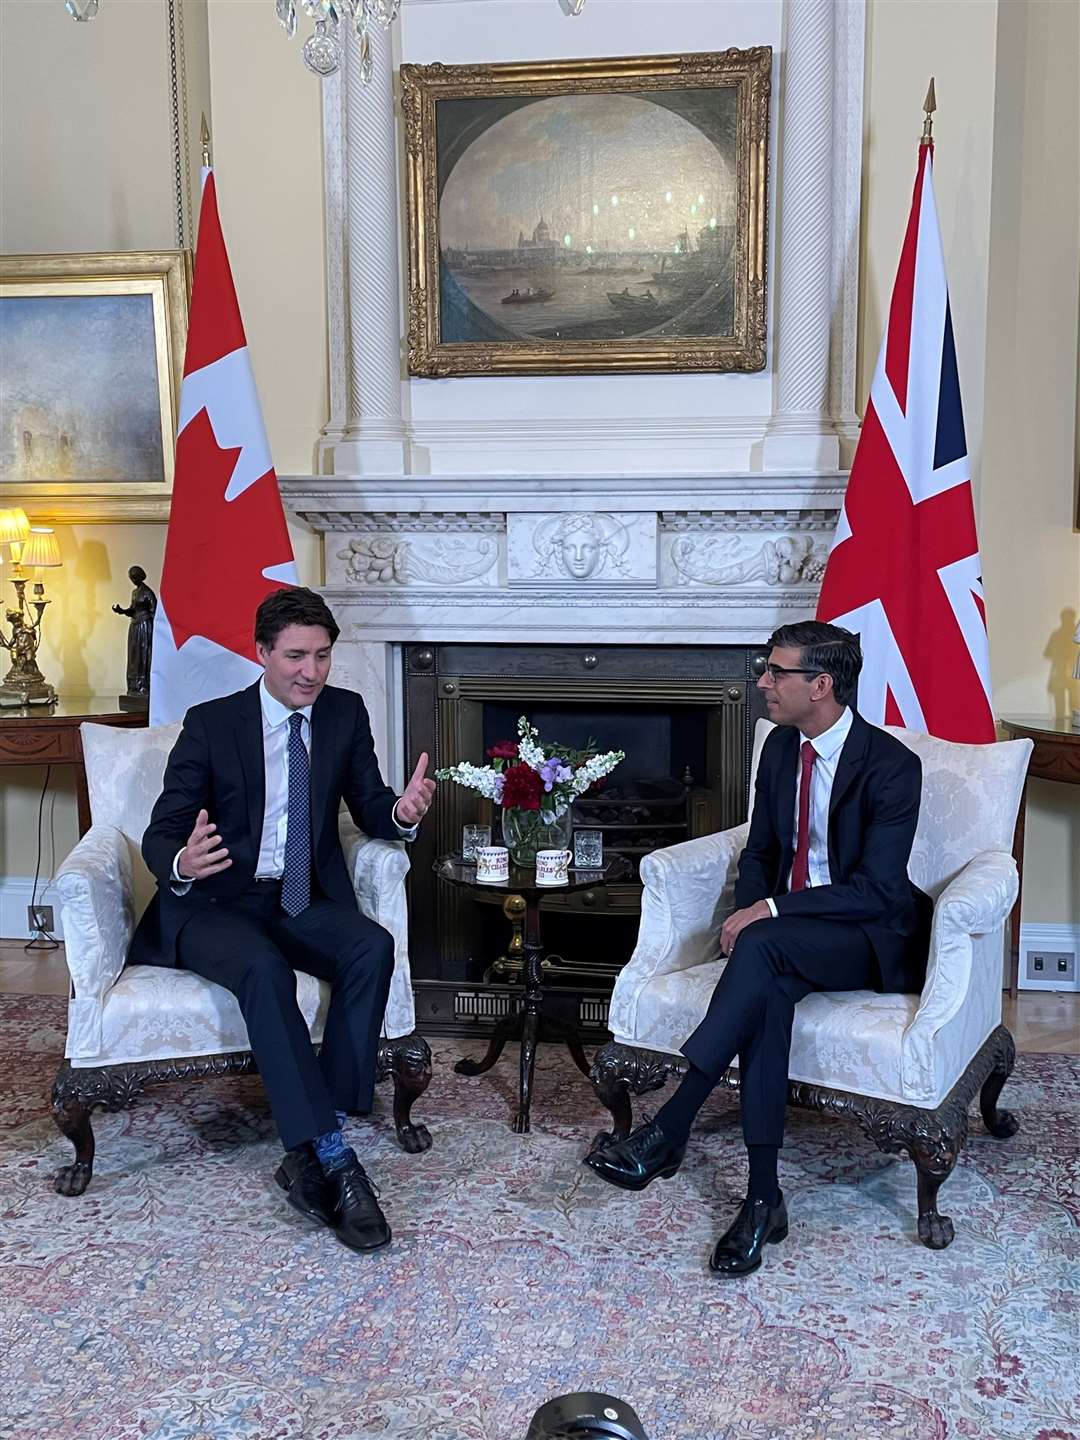 Justin Trudeau and Rishi Sunak exchanged warm words ahead of their private talks in No 10’s White Room (Sophie Wingate/PA)